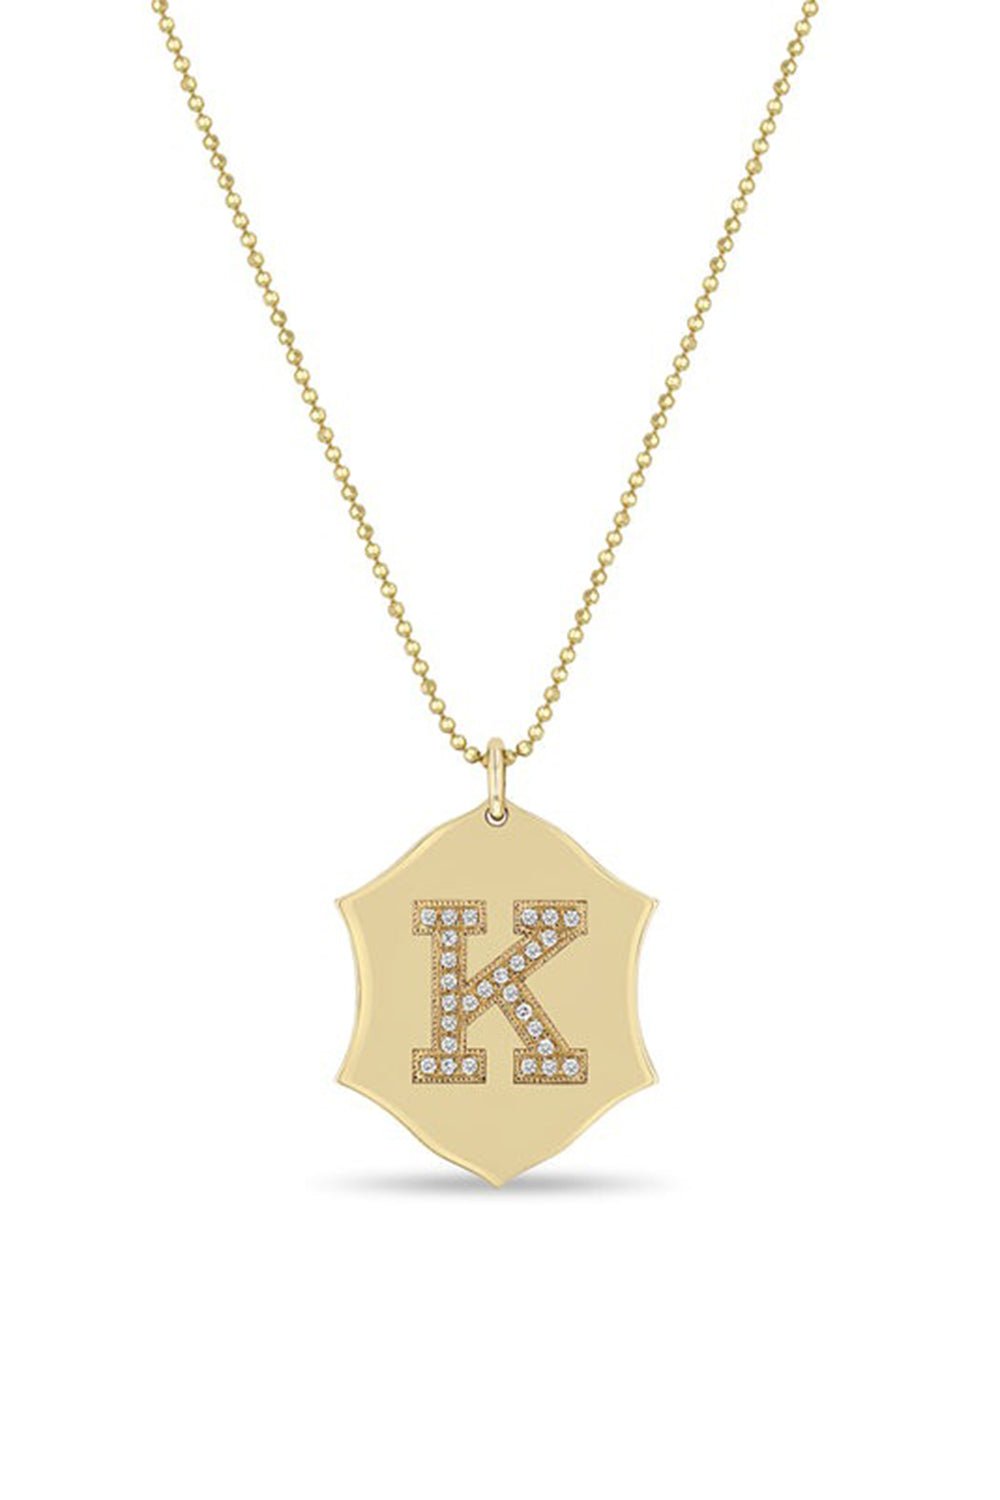 ZOE CHICCO-Initial Ornate Shield Pendant Necklace-YELLOW GOLD